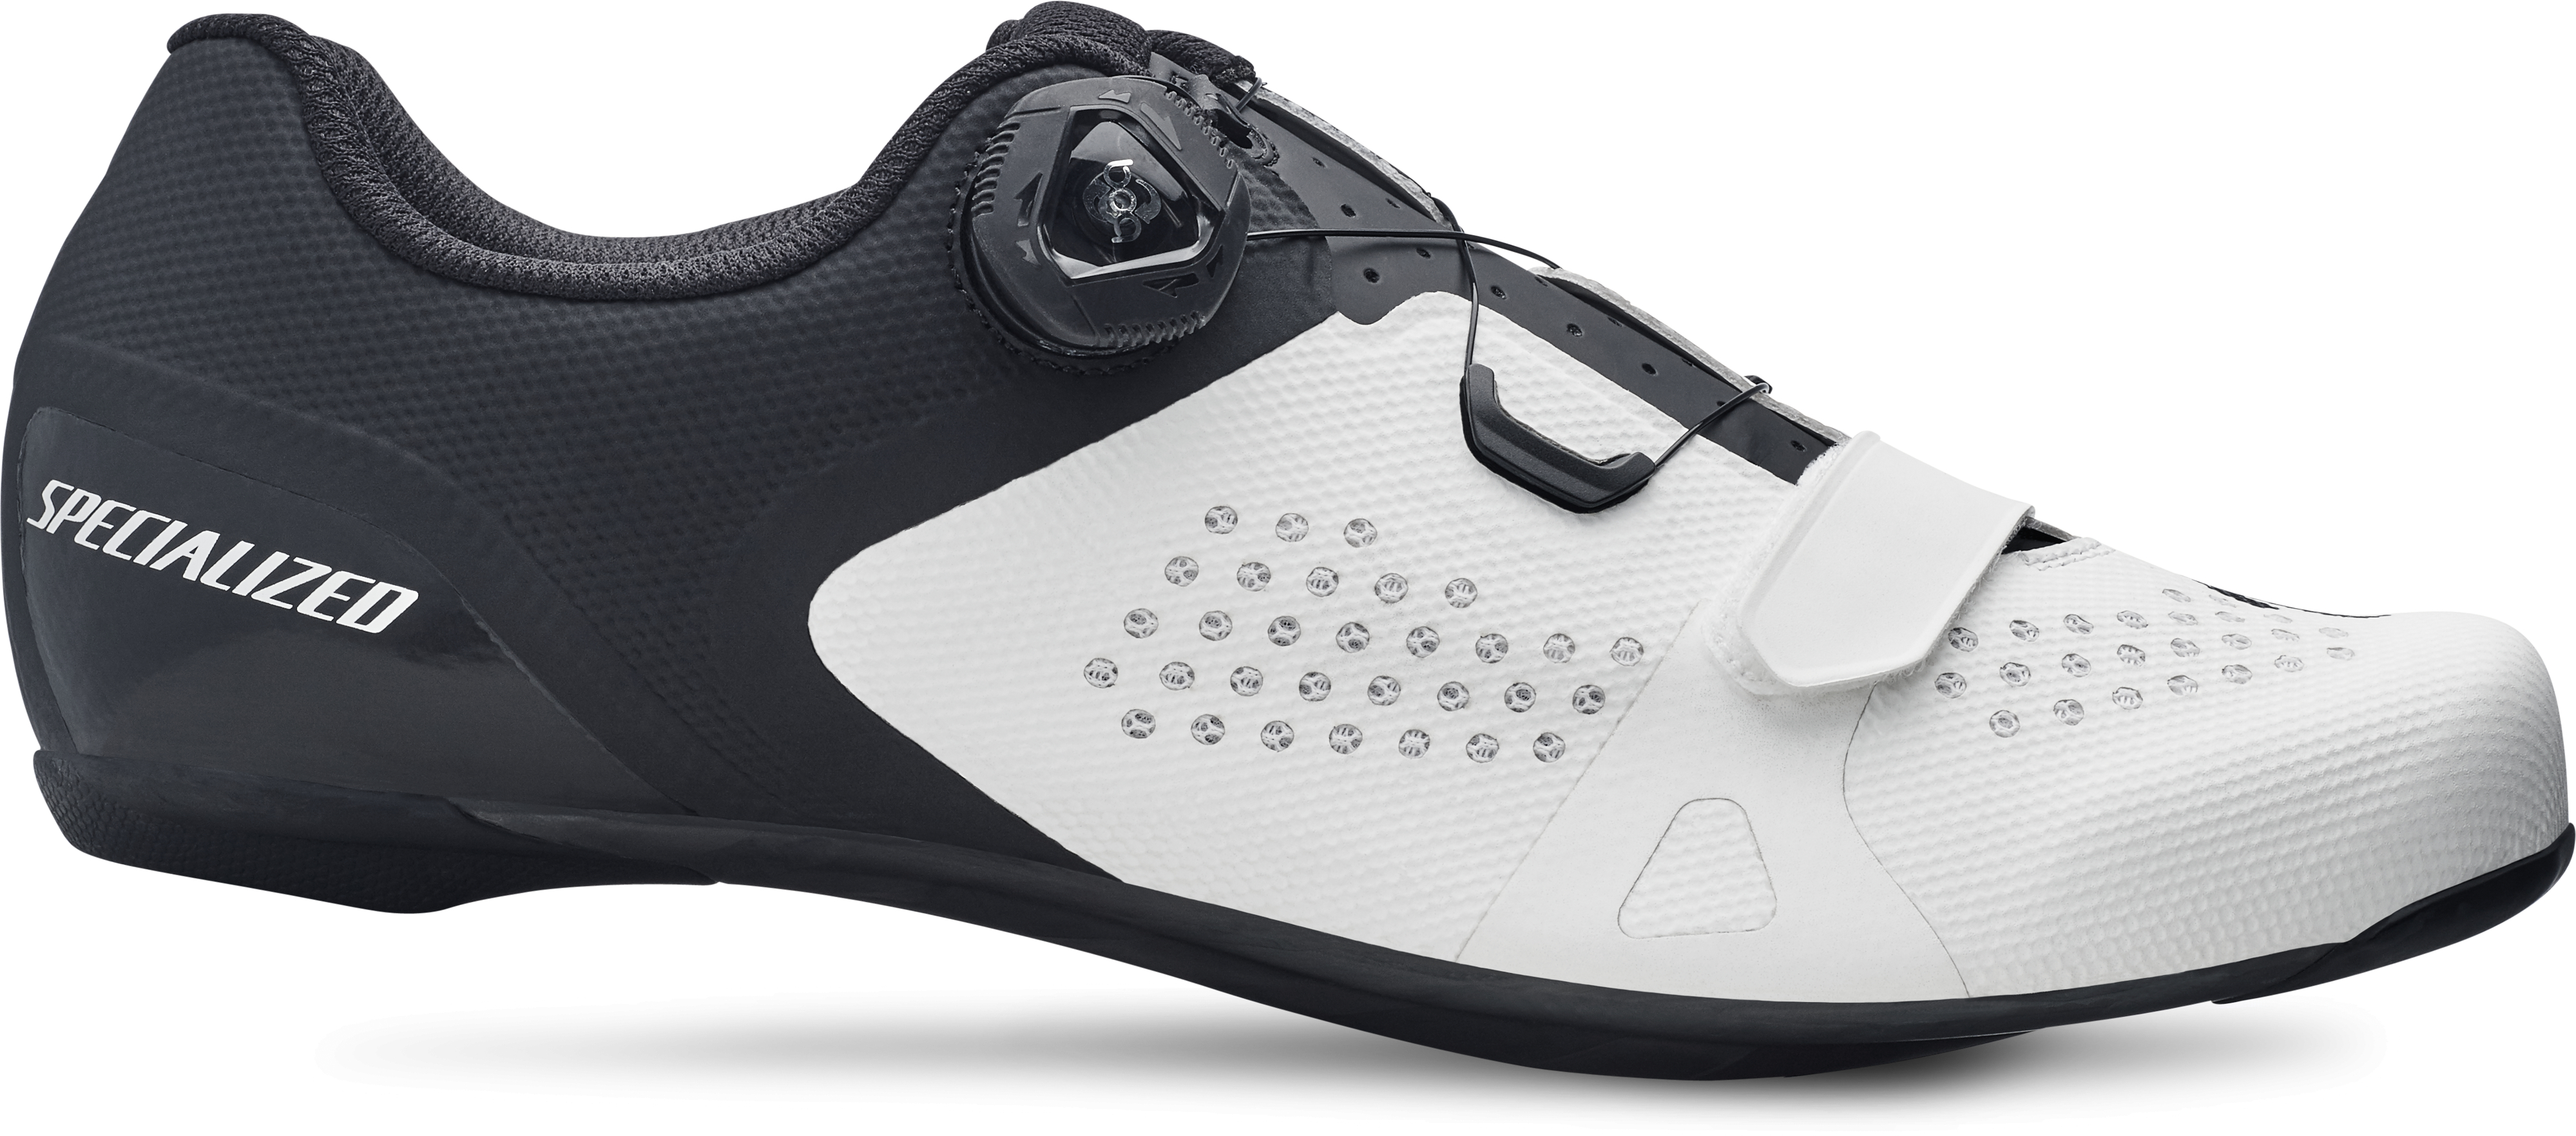 Specialized  Torch 2.0 Road Cycling Shoes  43 White